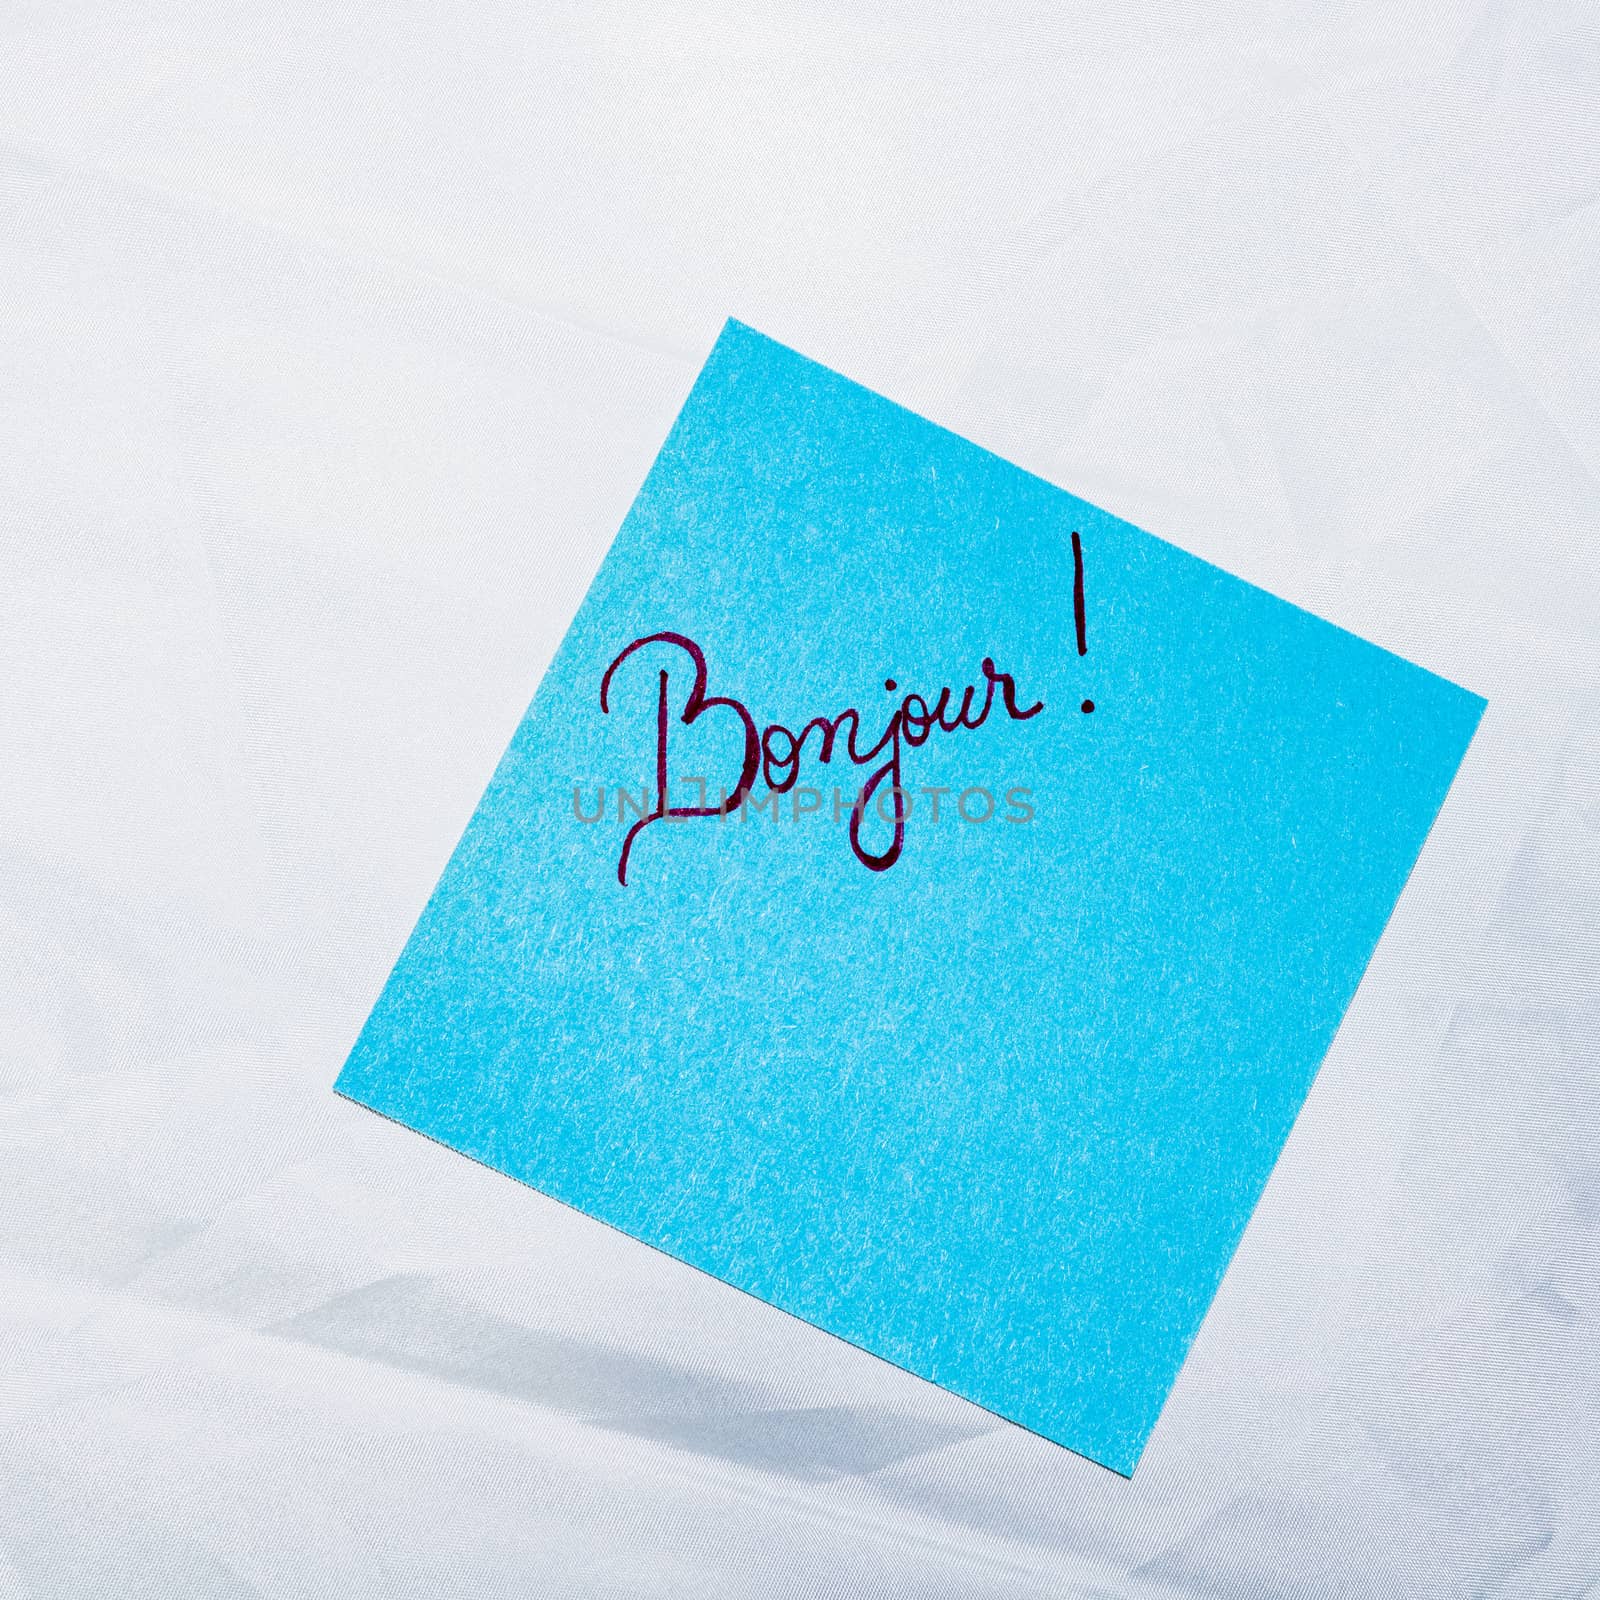 Text Bonjour on post it. Writing on colorful sticky note. Buchar by vladispas